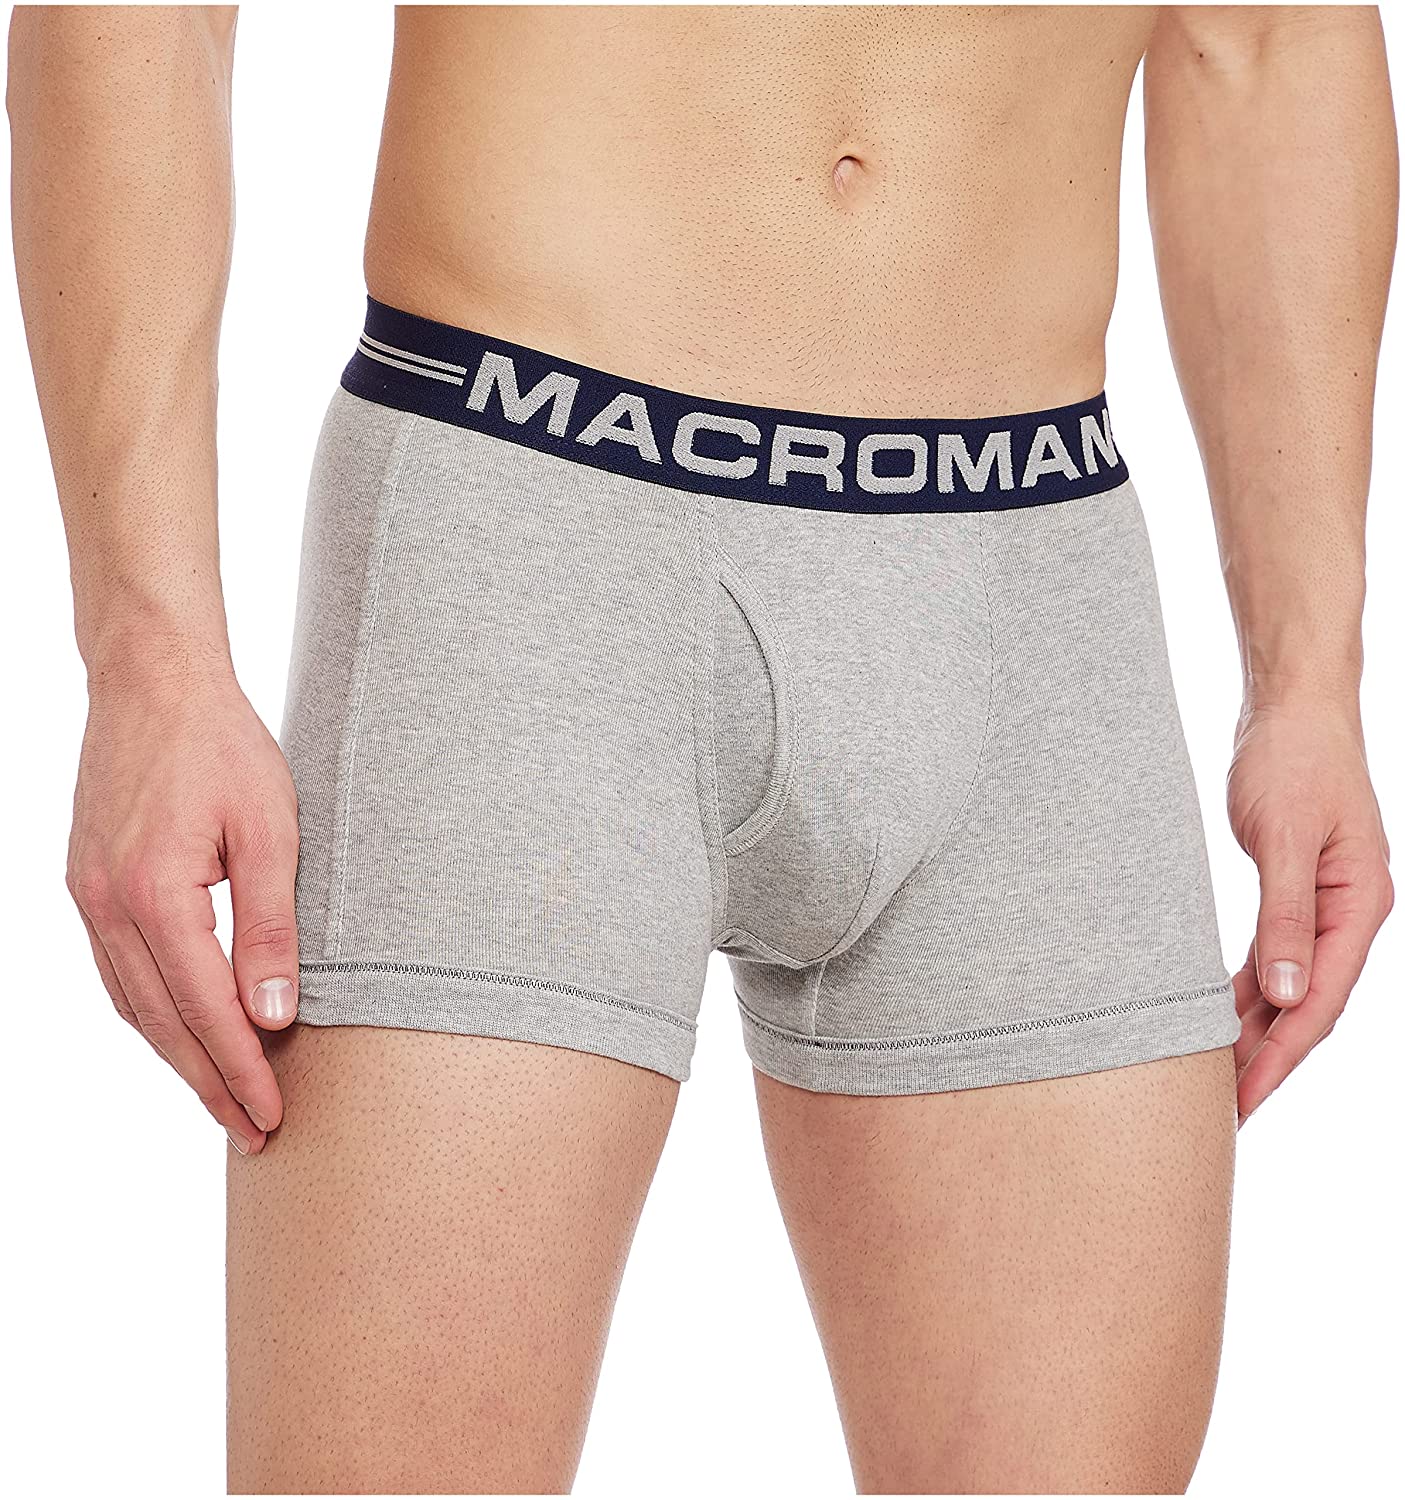 Macroman Magne Classic Boxer Front Open Brief (Outer Elastic